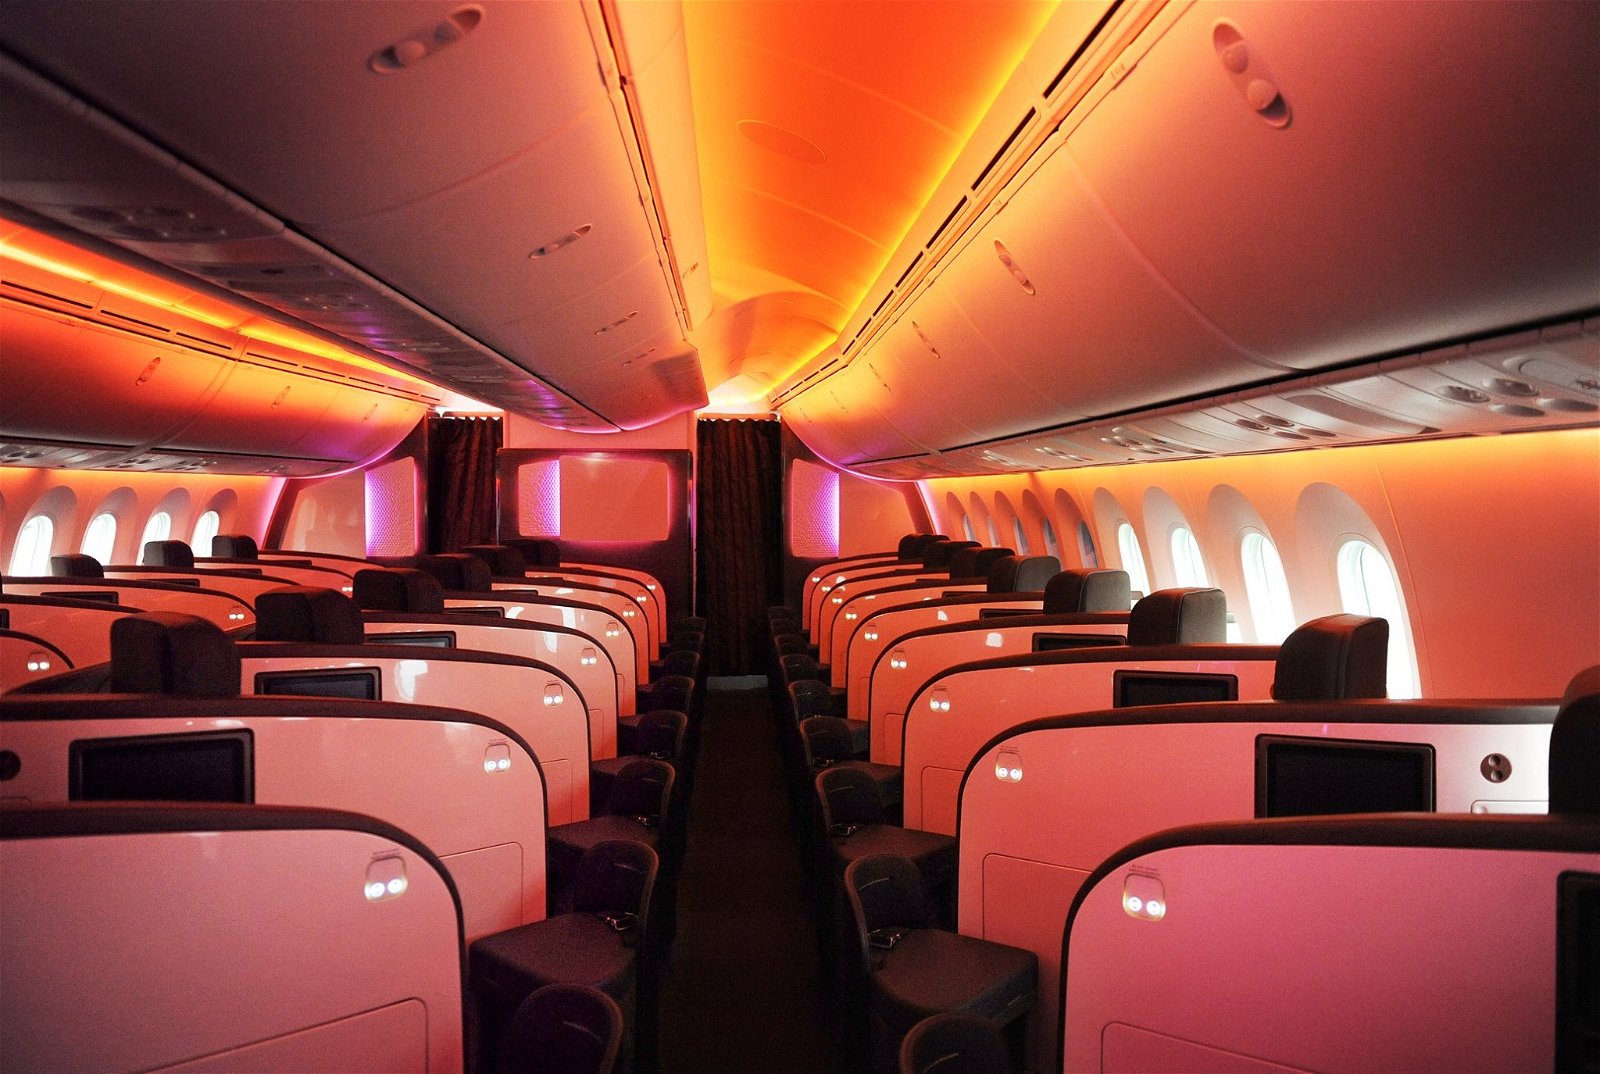 Virgin's new 787 Upper Class interior, which looks fabulous once you get past the janky wine list